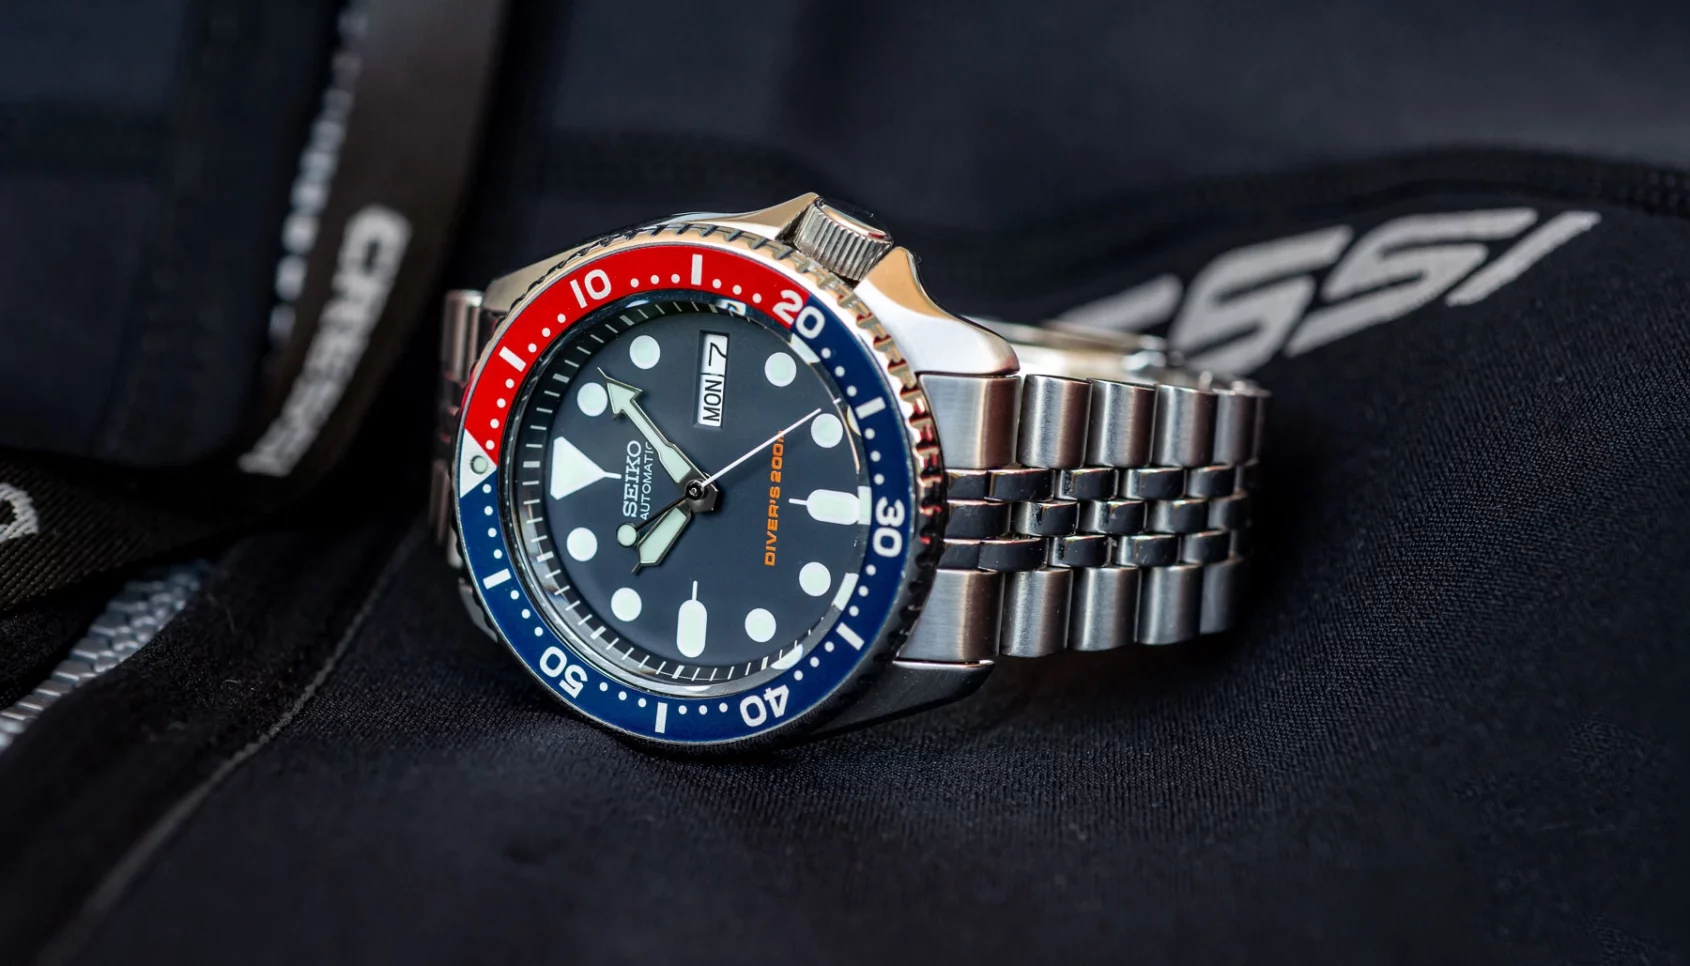 5 discontinued Seiko watches you can still easily buy